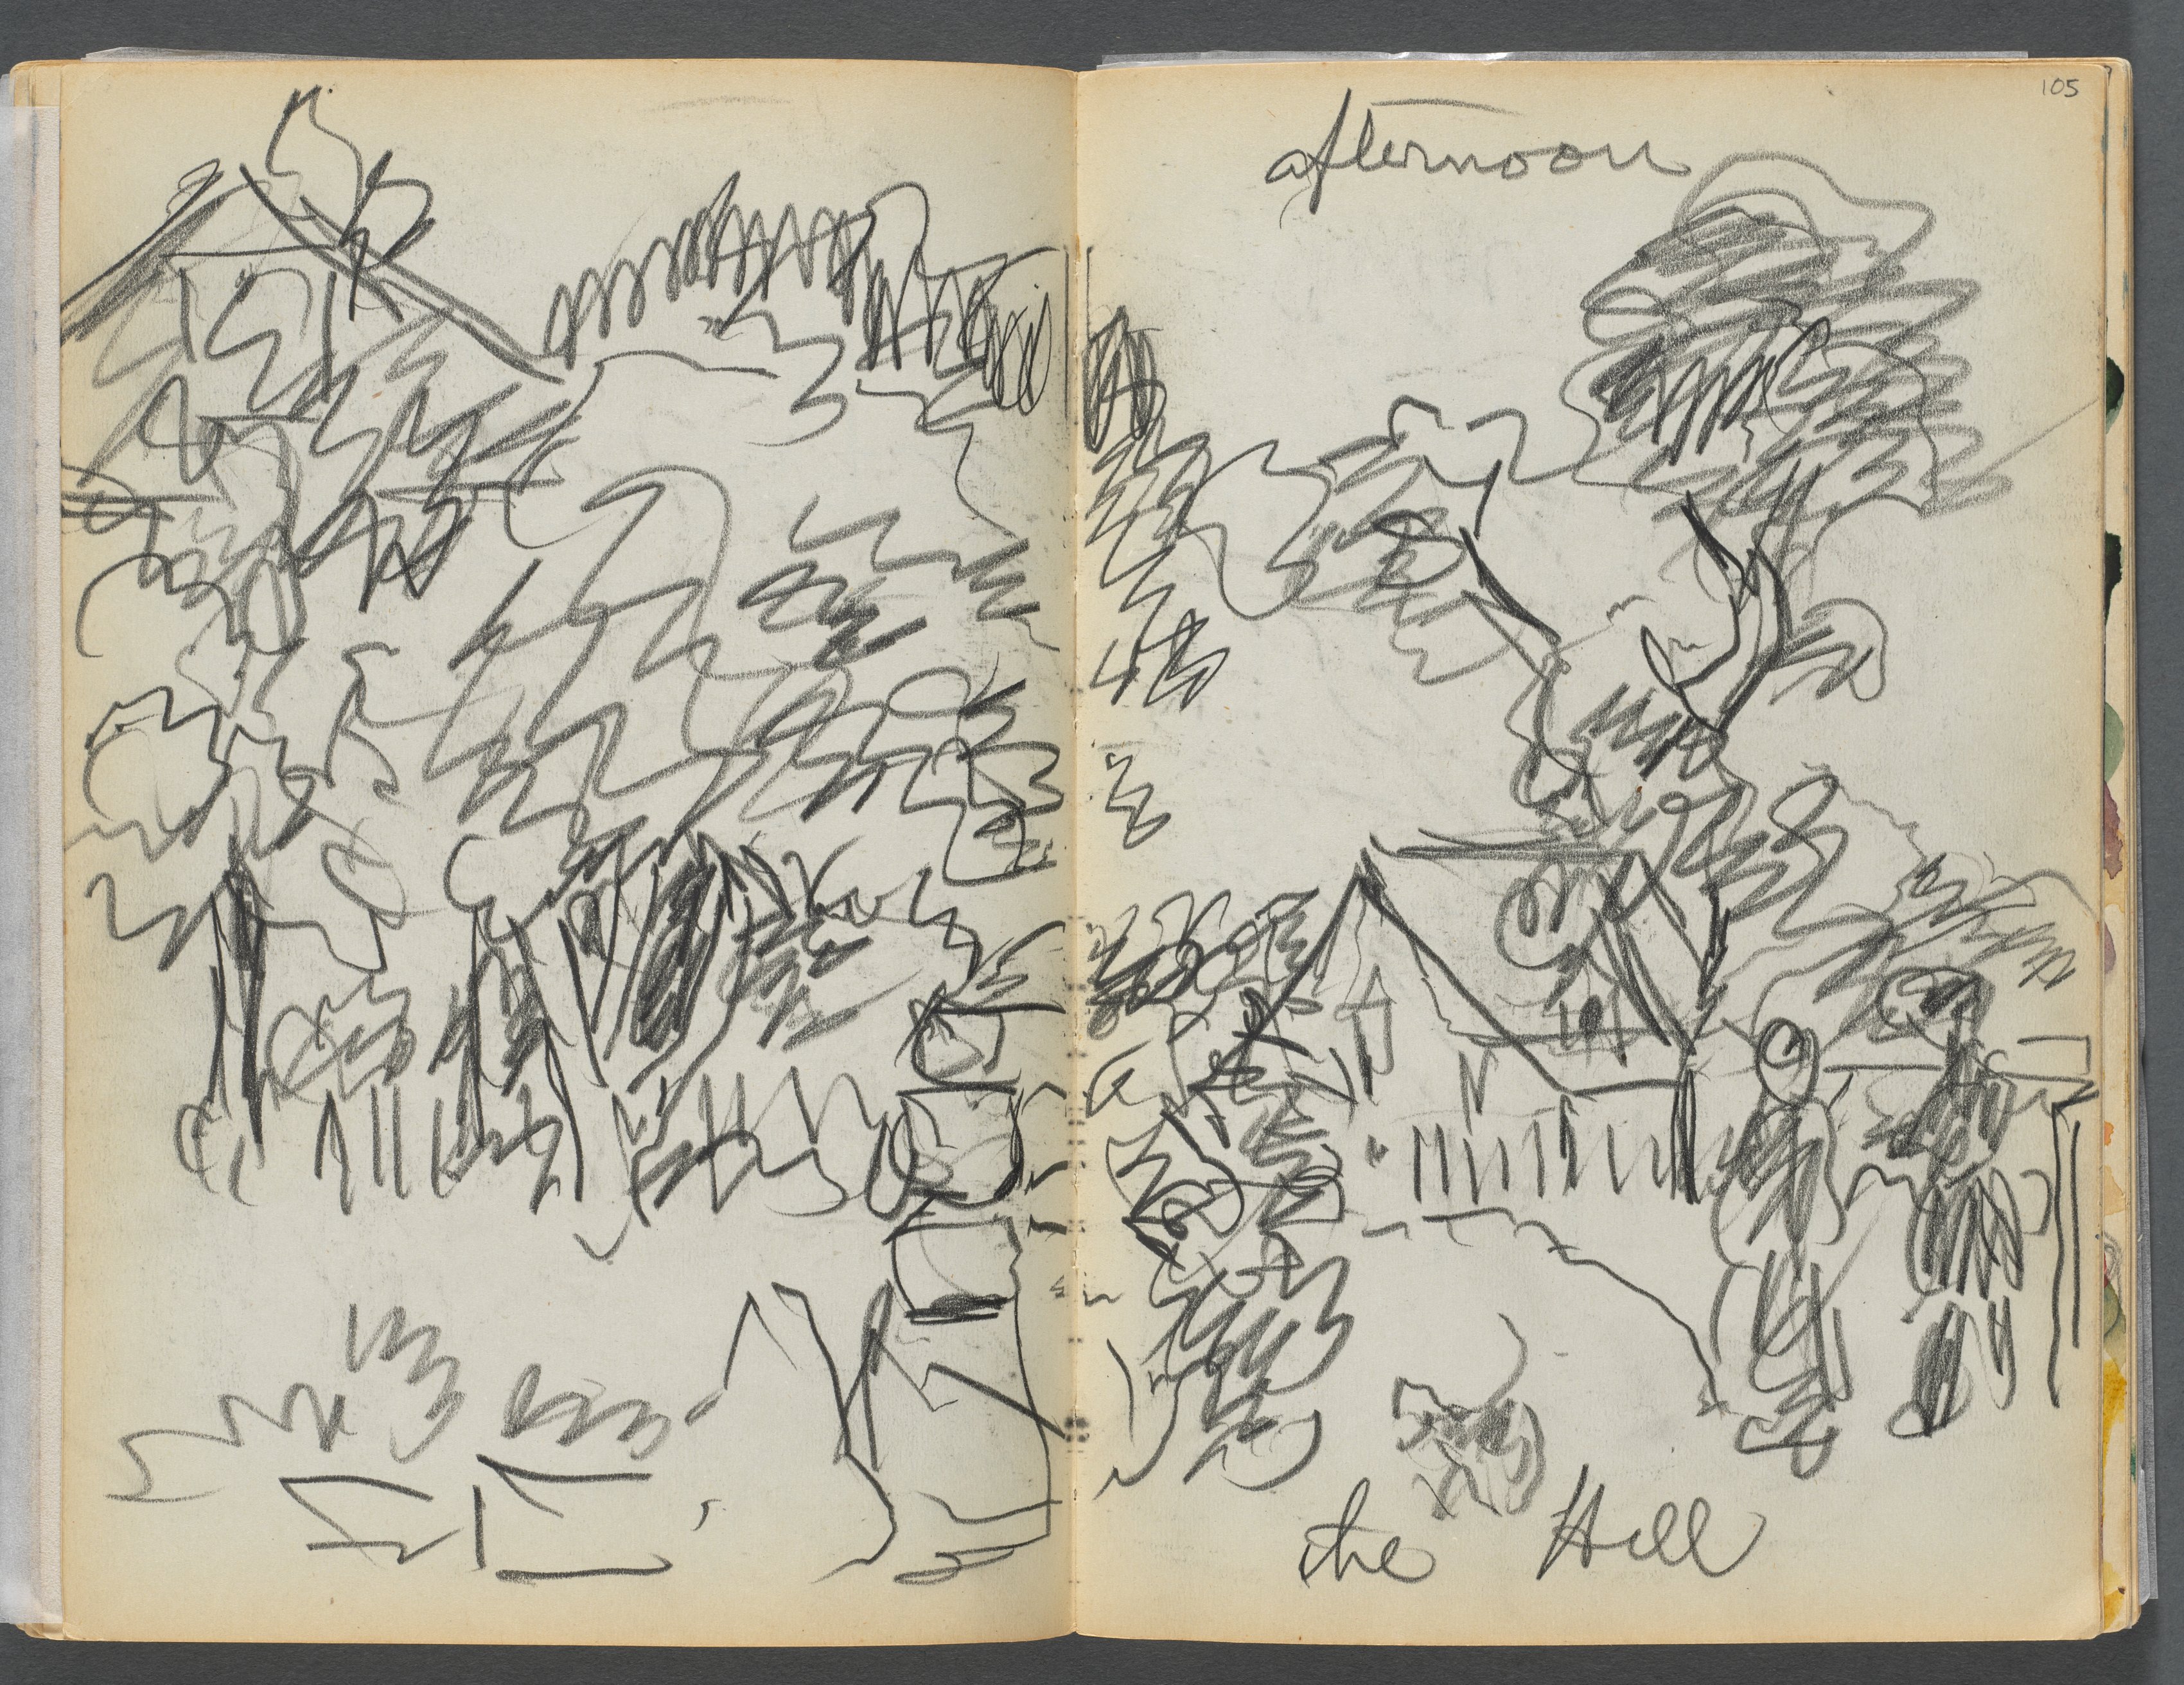 Sketchbook- The Granite Shore Hotel, Rockport, page 104- 105: "Afternoon , the hill"